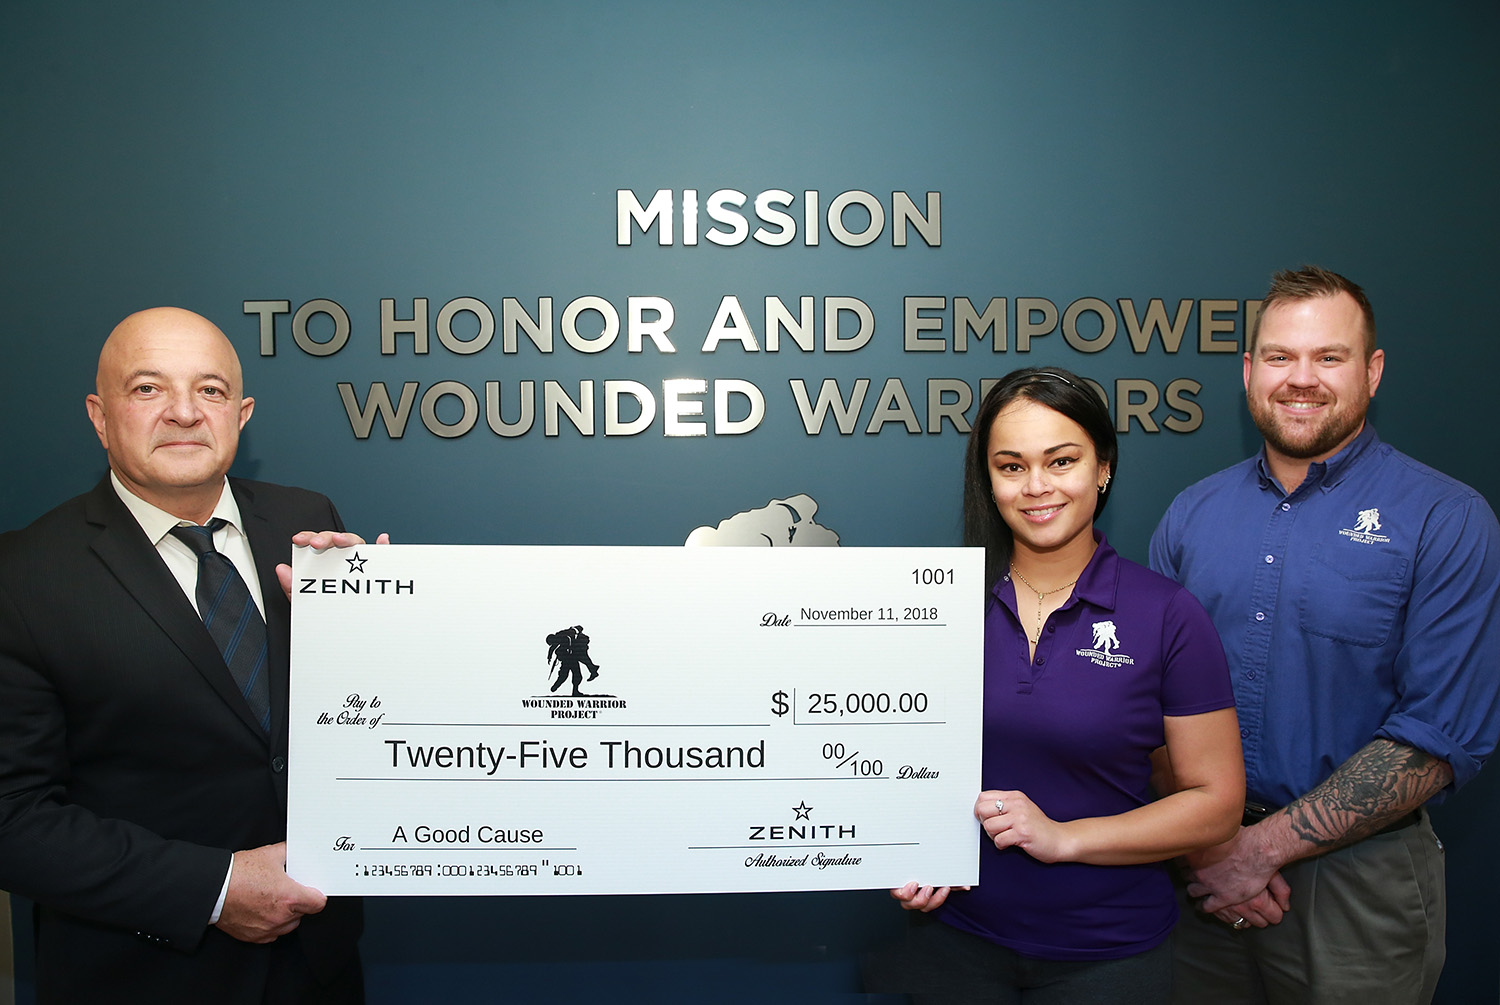 Zenith Partners with Wounded Warrior Project